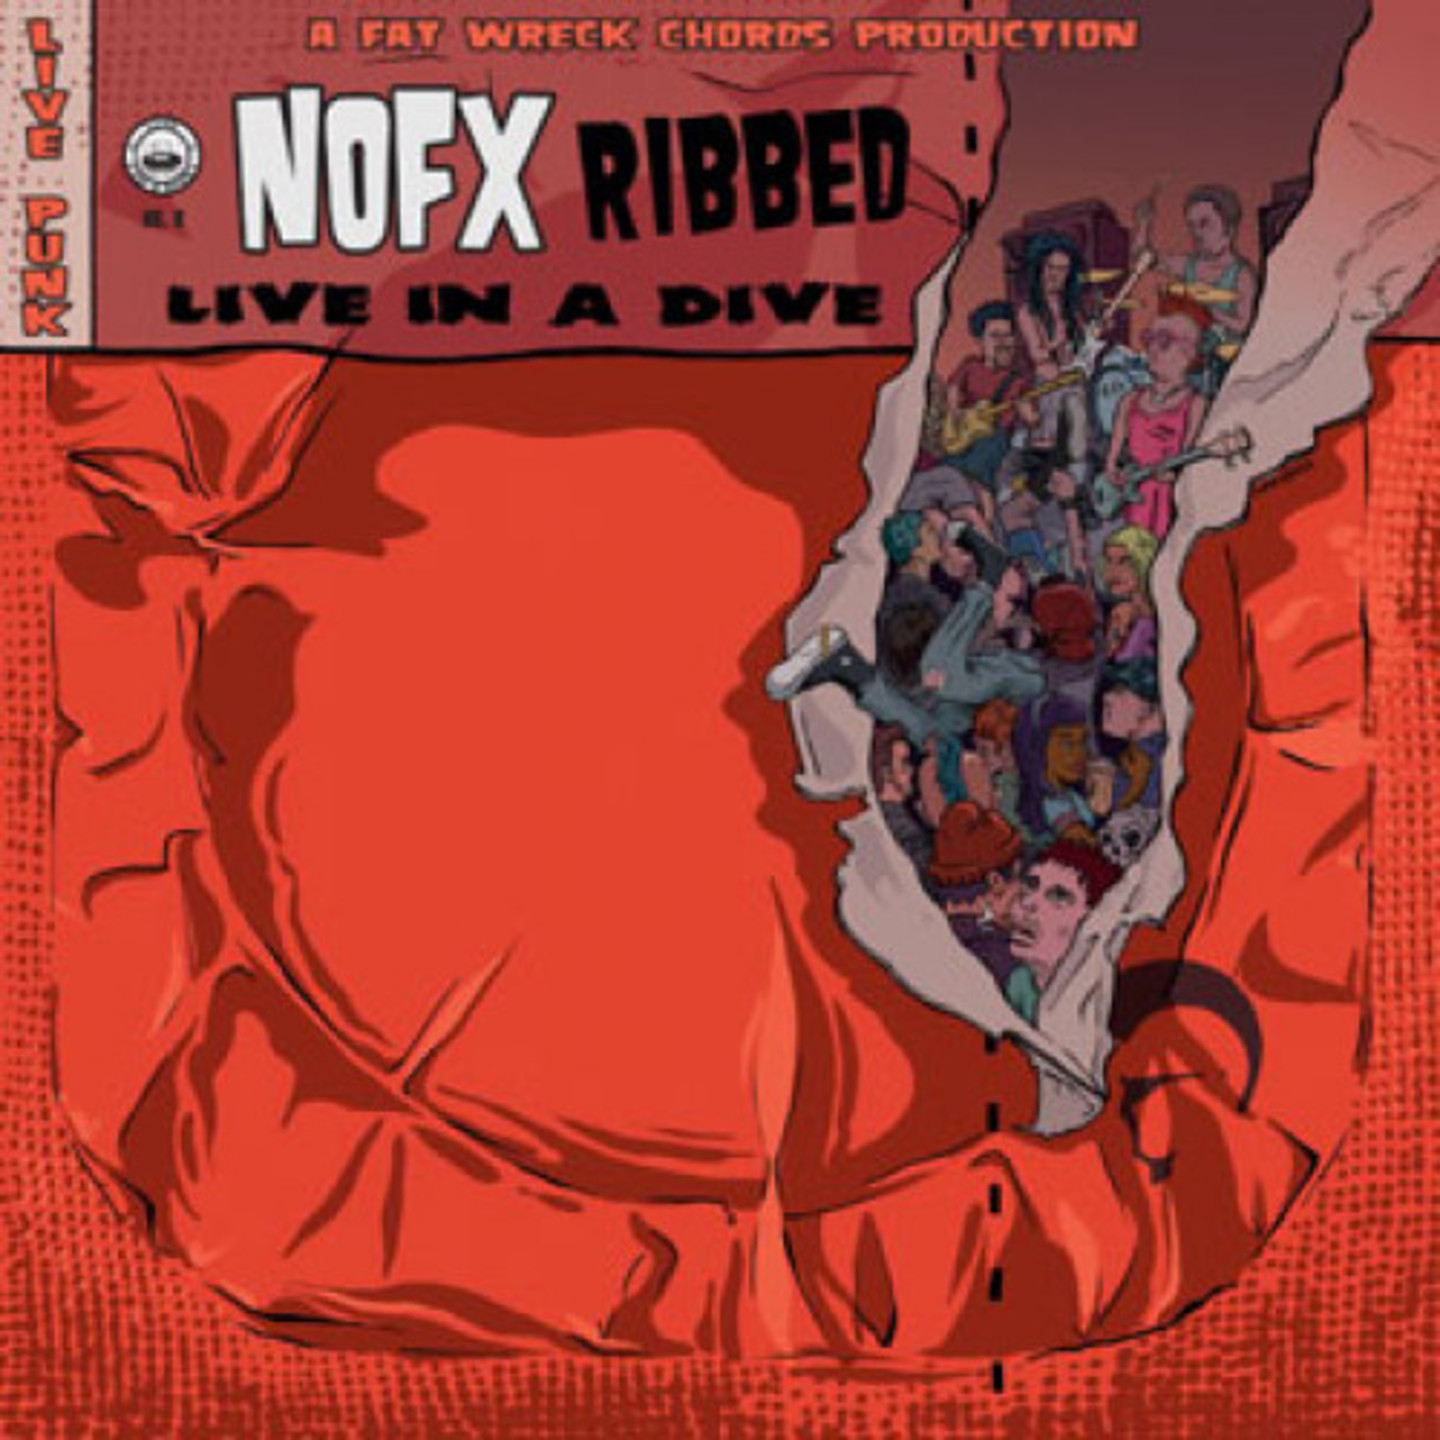 NOFX - Ribbed Live In A Dive LP